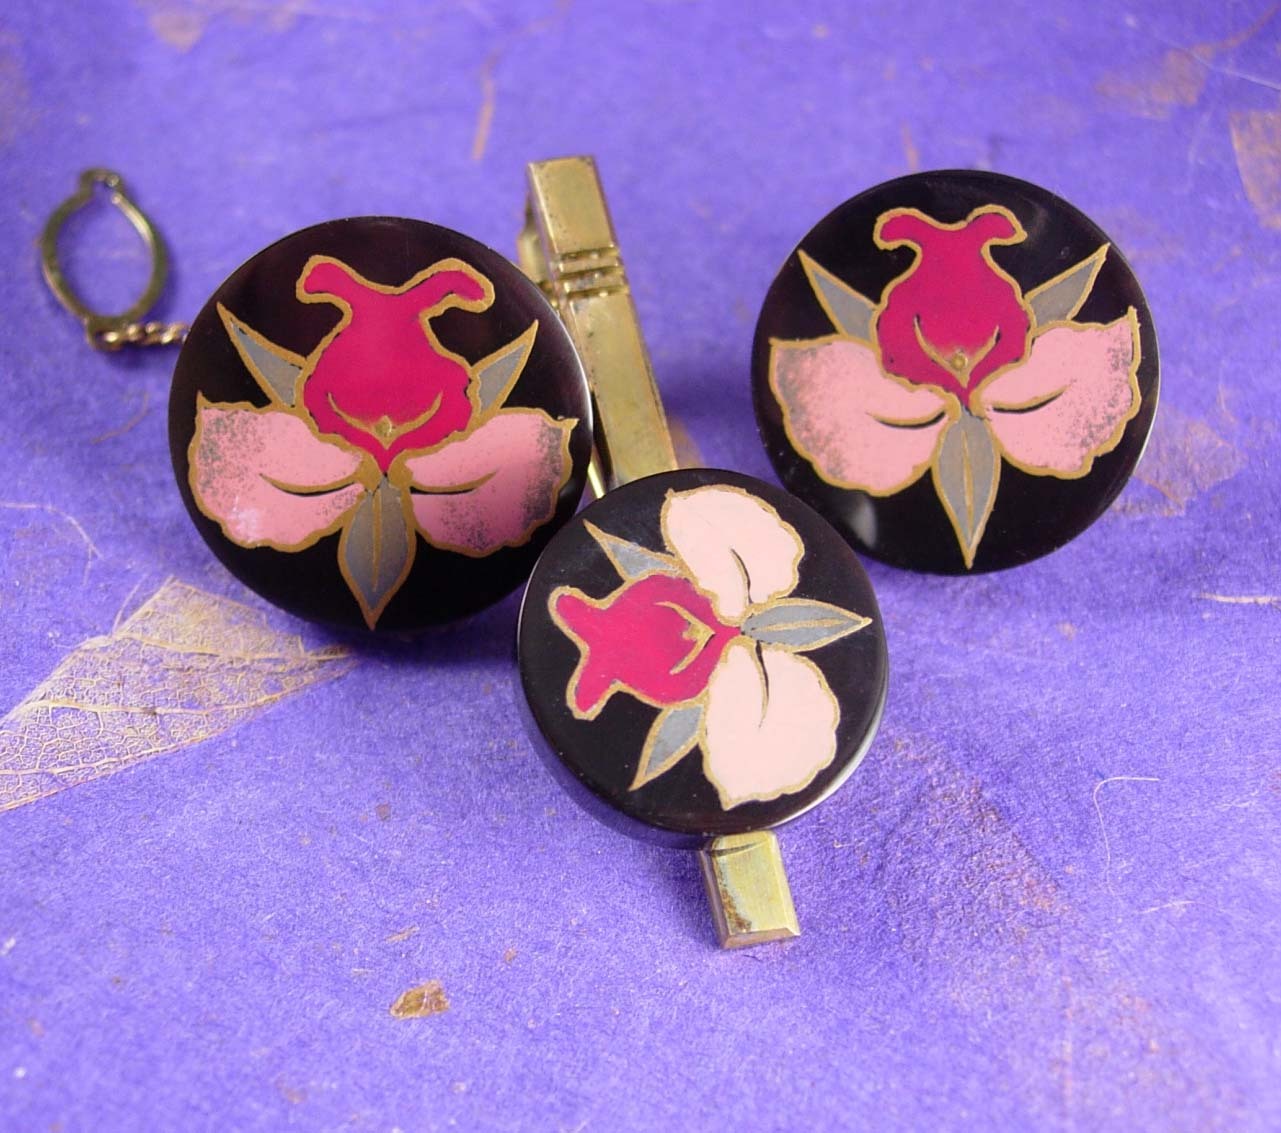 Antique sterling silver cufflinks lacquer hand painted flower tie clip set Japan - $275.00